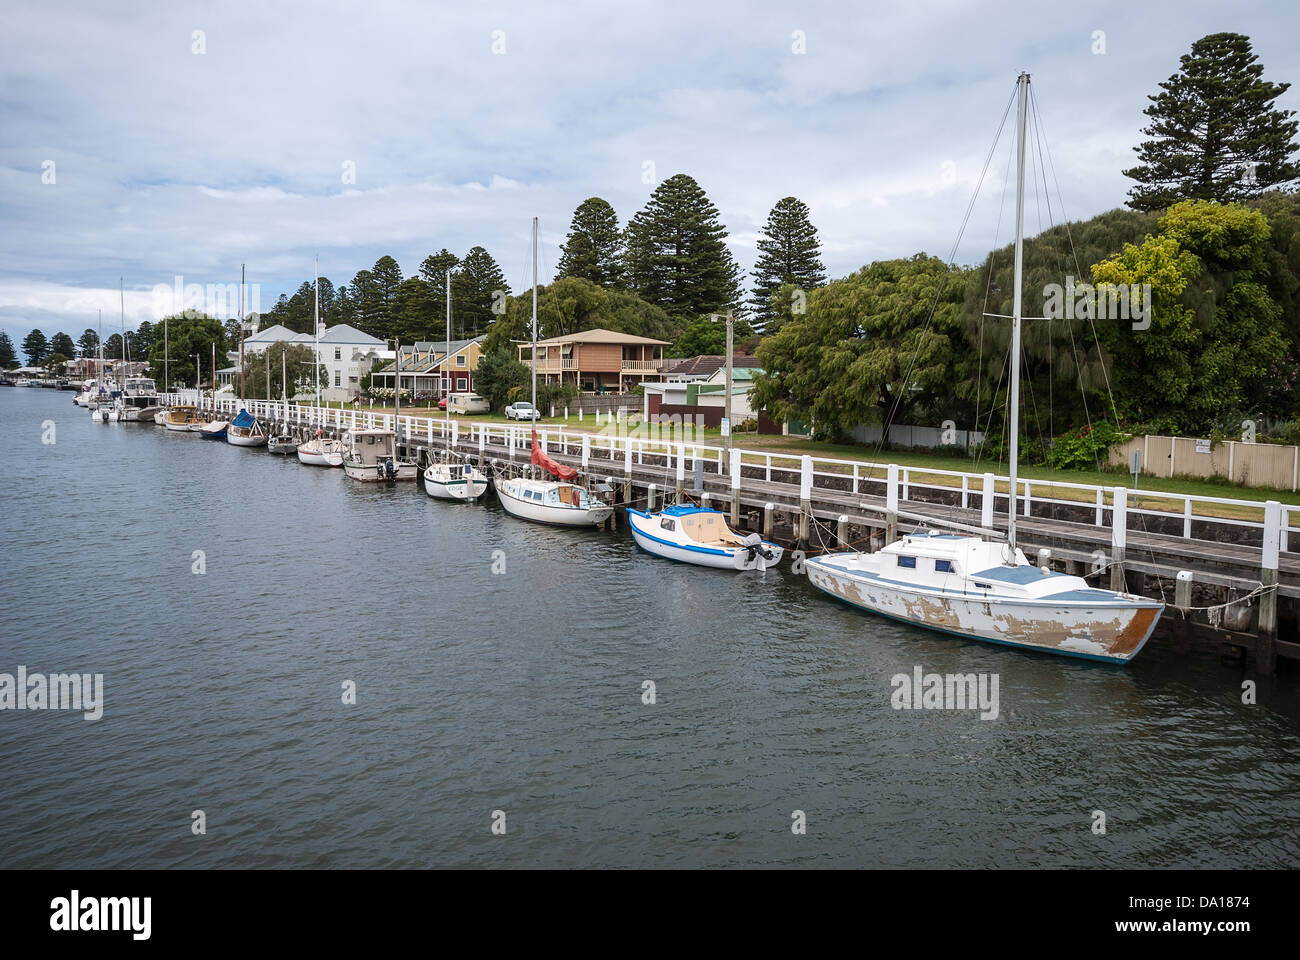 The picturesque fishing town of Port Fairy on the western end of the Great Ocean Road in Victoria, Australia. Stock Photo